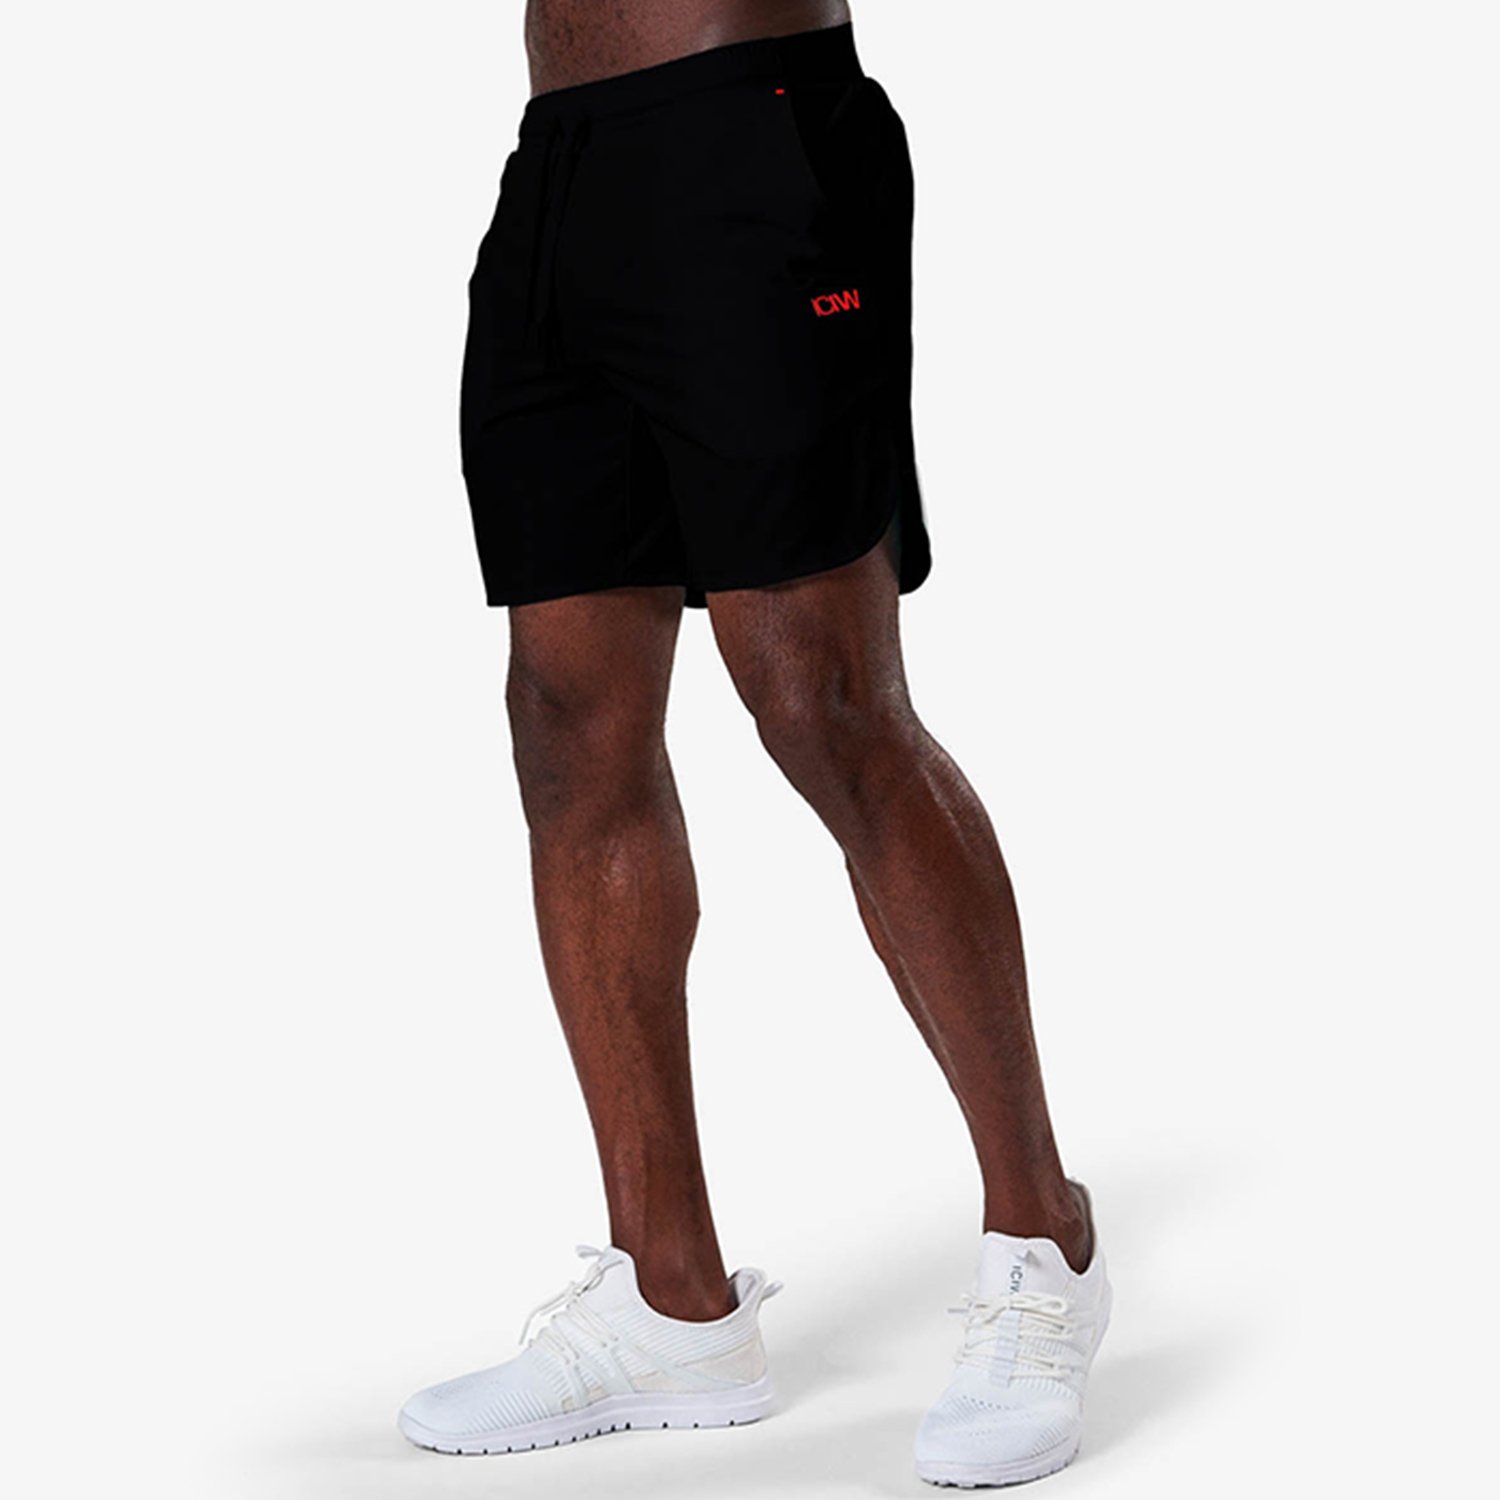 Competitor Shorts, Black